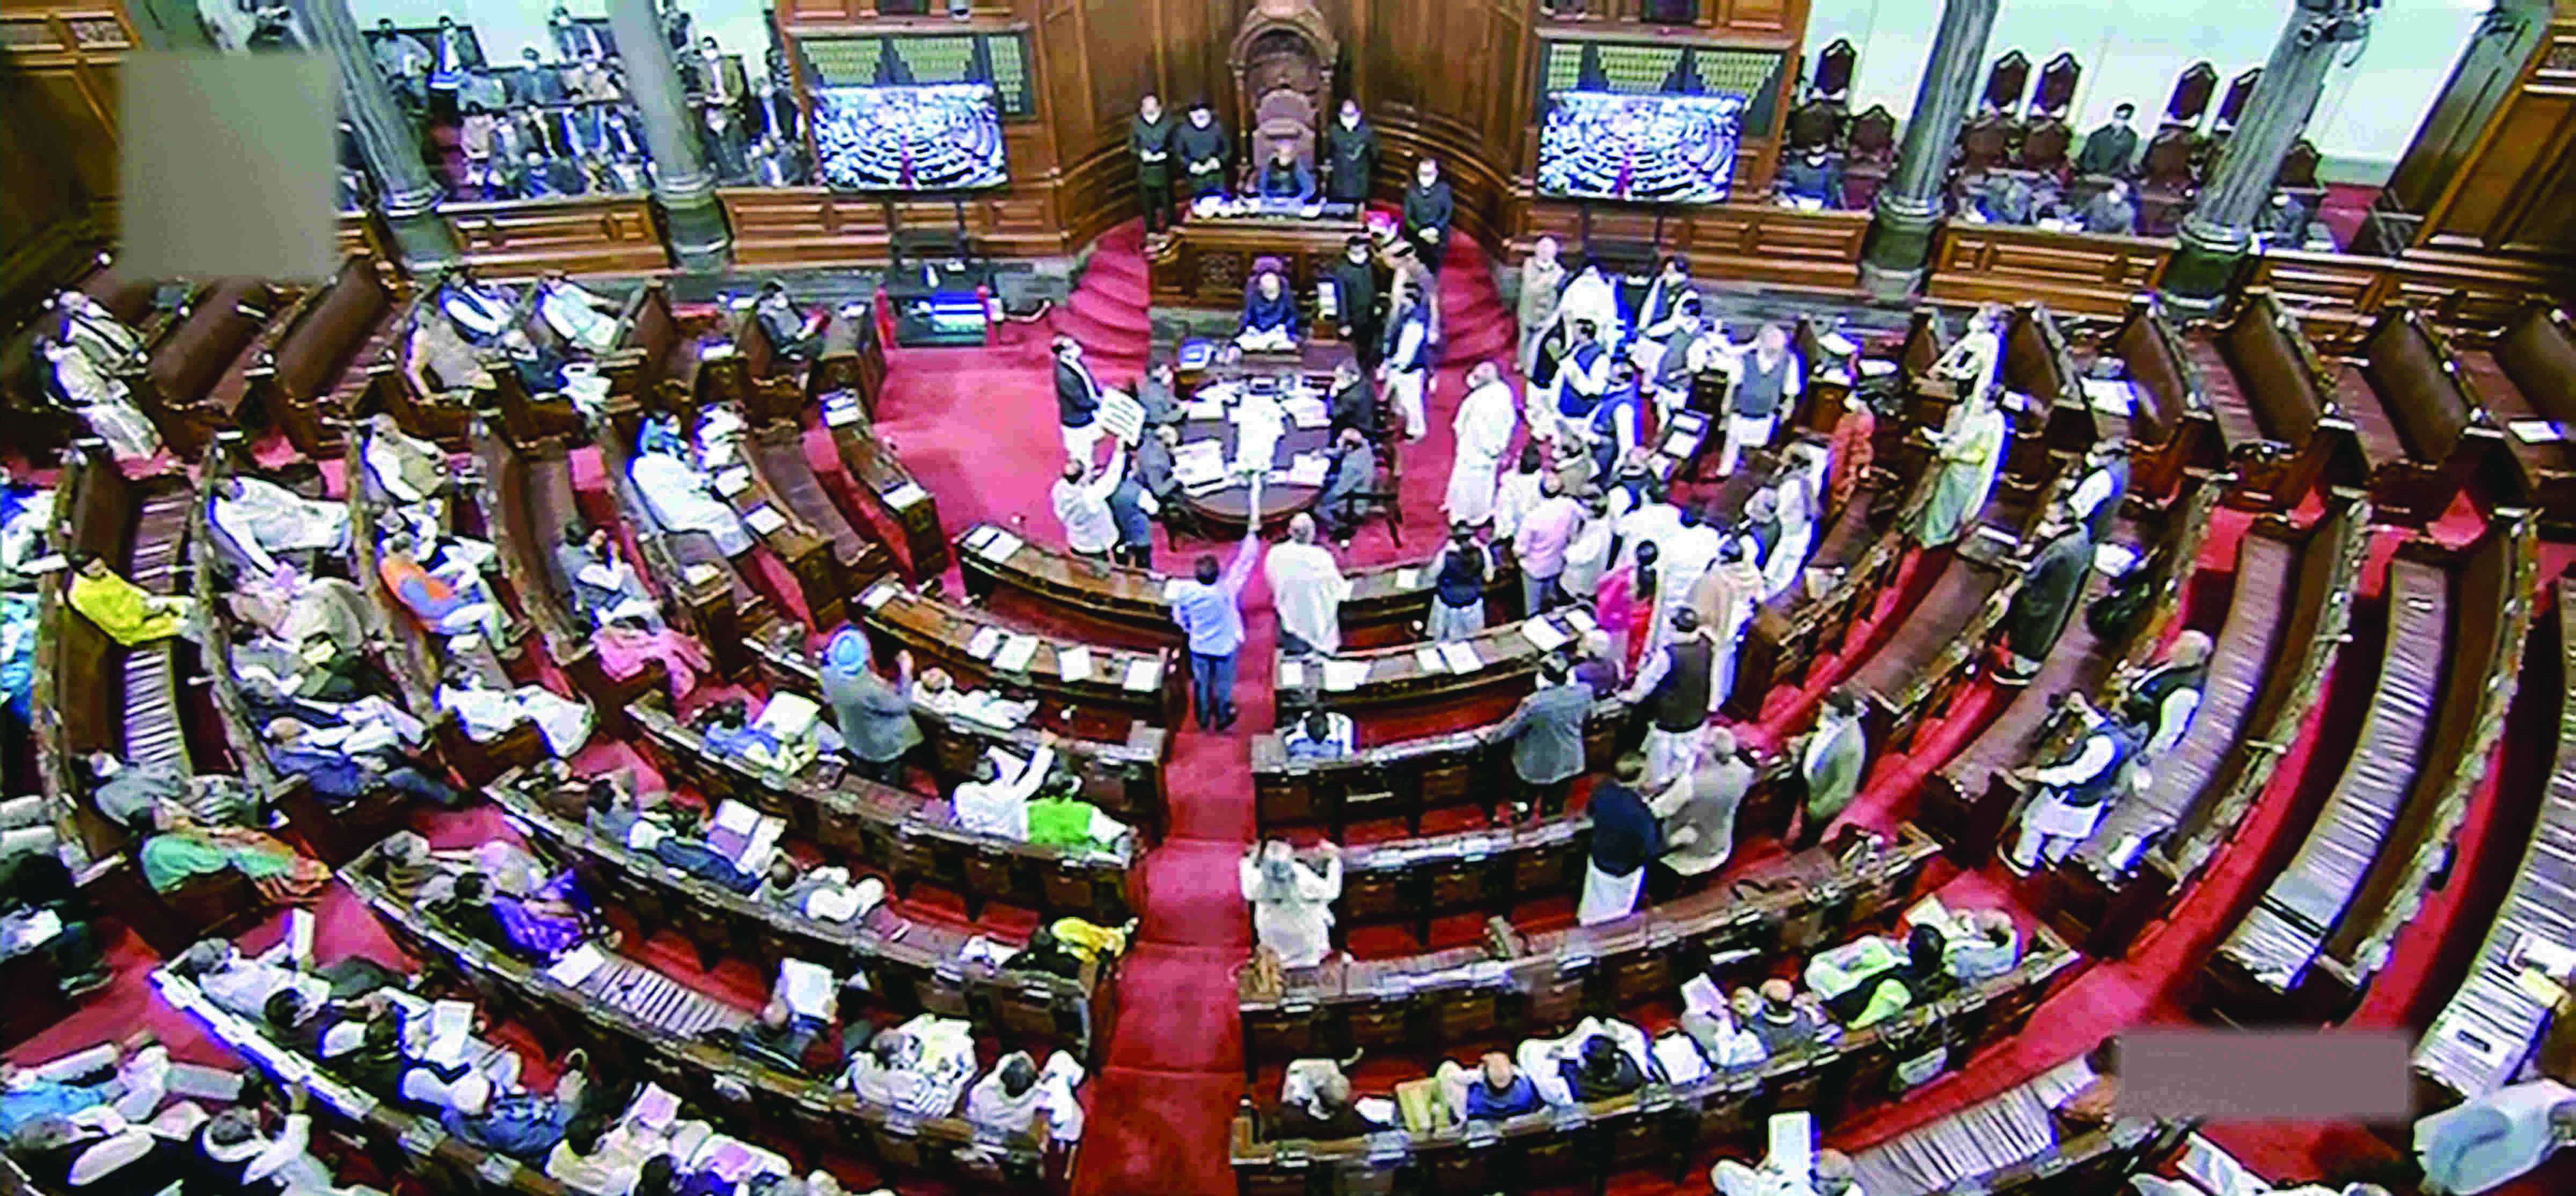 Oppn protests force repeated adjournments in Rajya Sabha